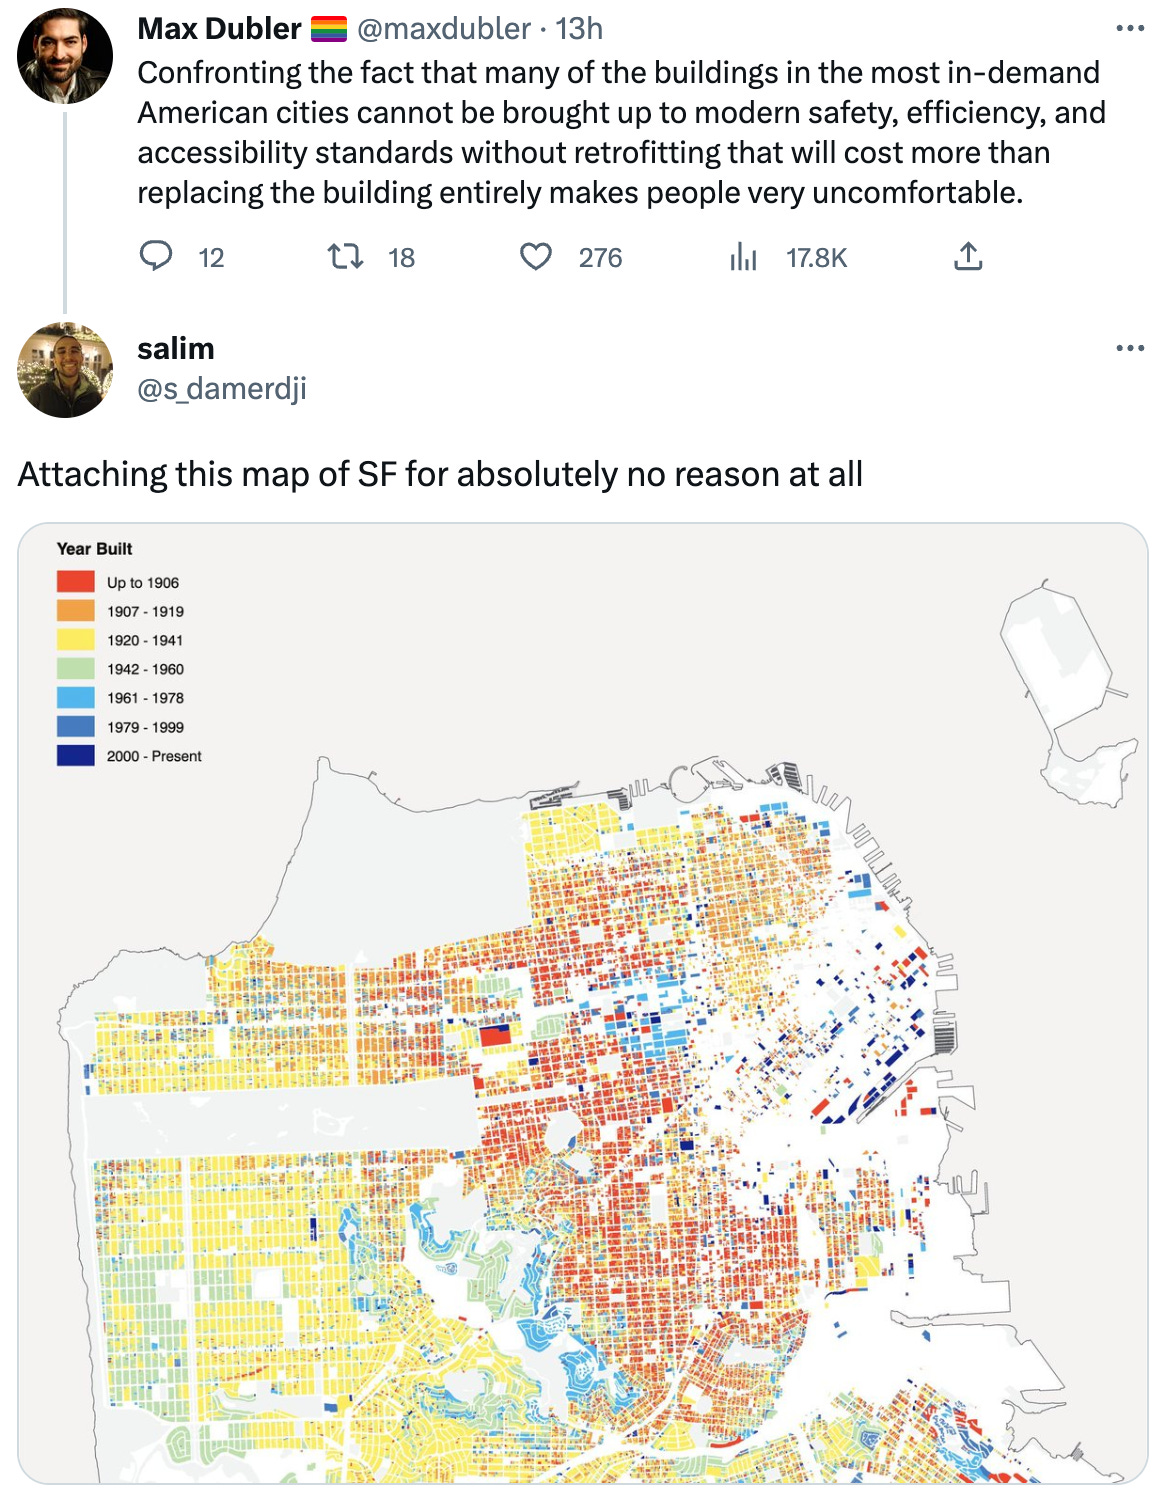  See new Tweets Conversation Max Dubler 🏳️‍🌈 @maxdubler · 13h Confronting the fact that many of the buildings in the most in-demand American cities cannot be brought up to modern safety, efficiency, and accessibility standards without retrofitting that will cost more than replacing the building entirely makes people very uncomfortable. salim @s_damerdji Attaching this map of SF for absolutely no reason at all